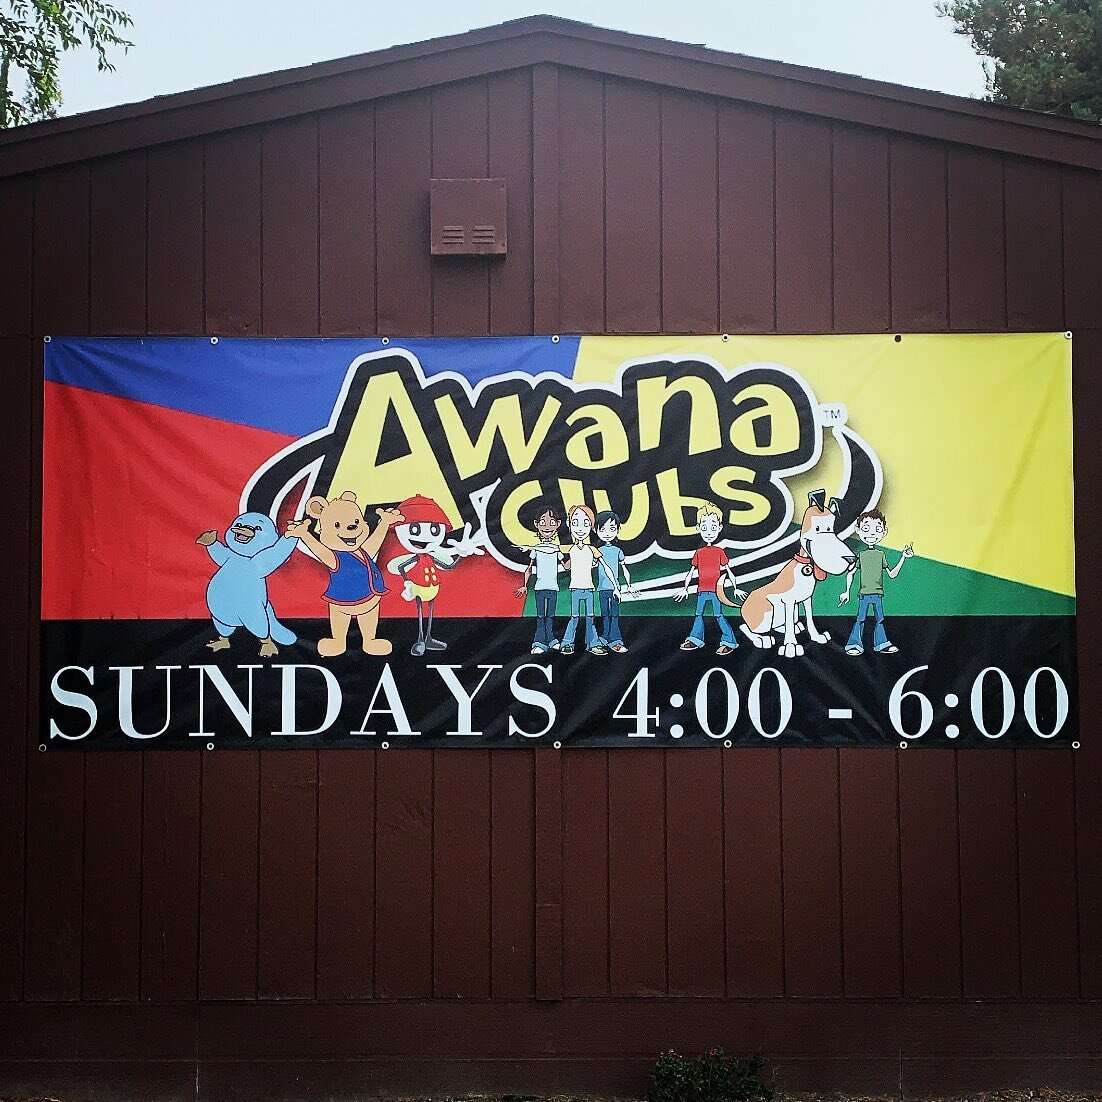 Come to Christ Community Church for AWANA Bible Clubs!! Immerse your child in a Bible teaching program so that they can become genuine followers of Christ!! For any questions just shoot us a DM! 🙏🏻✝️